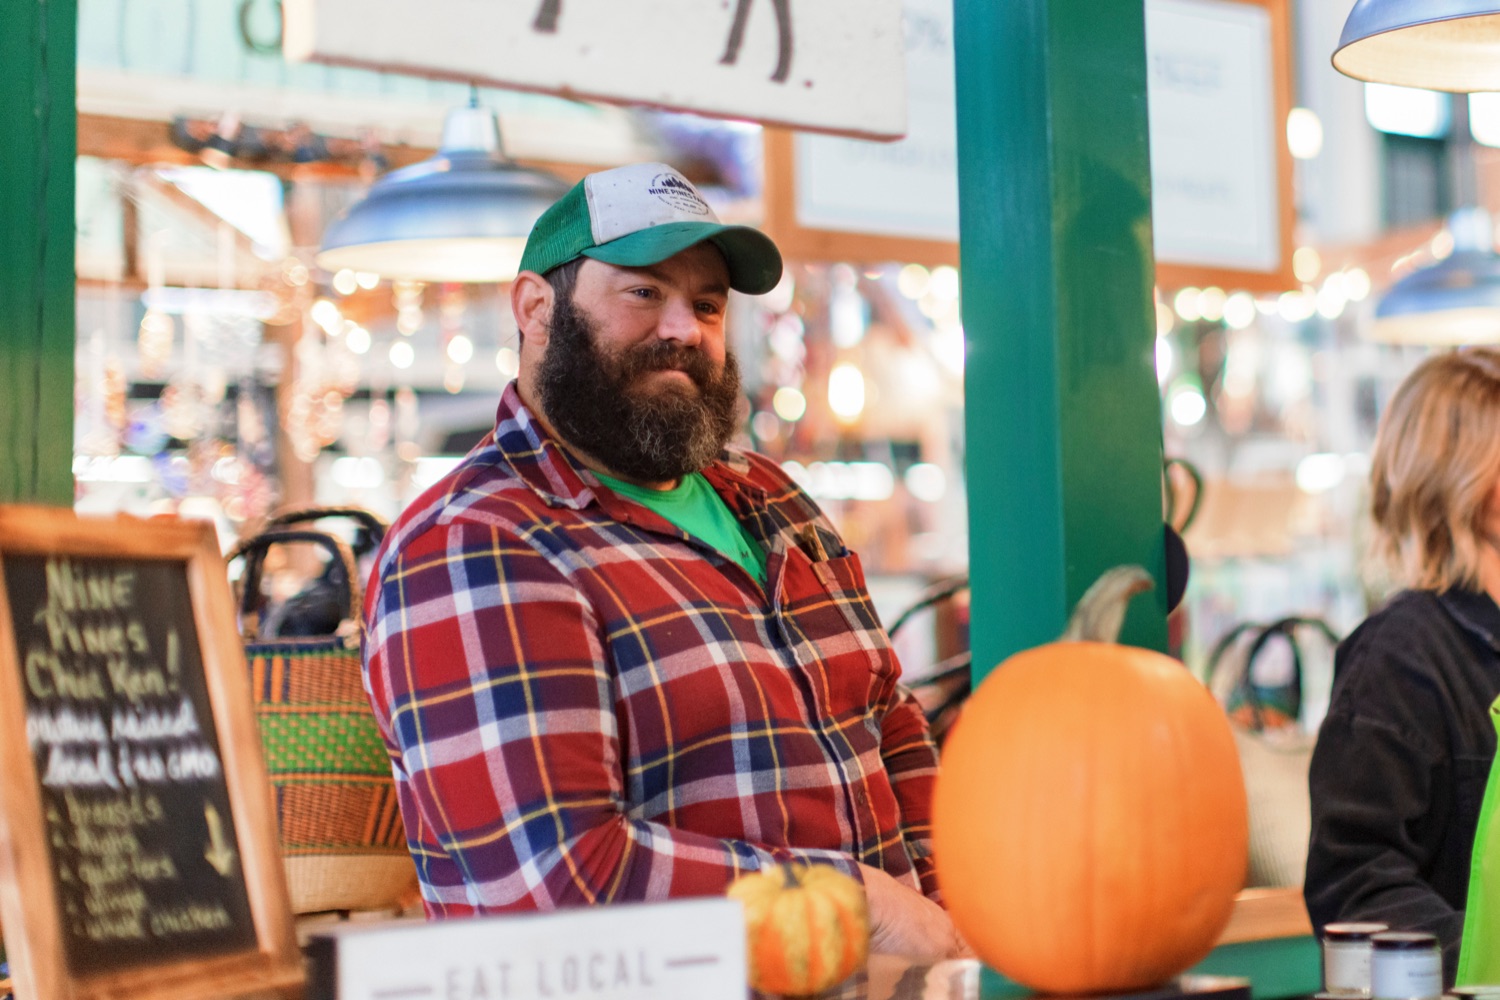 James Cornwell, owner of Nine Pines Farm, at York Central Market House on Thursday, November 17, 2022.<br><a href="https://filesource.amperwave.net/commonwealthofpa/photo/22347_AG_Thanksgiving_Shopping_NK_007.JPG" target="_blank">⇣ Download Photo</a>